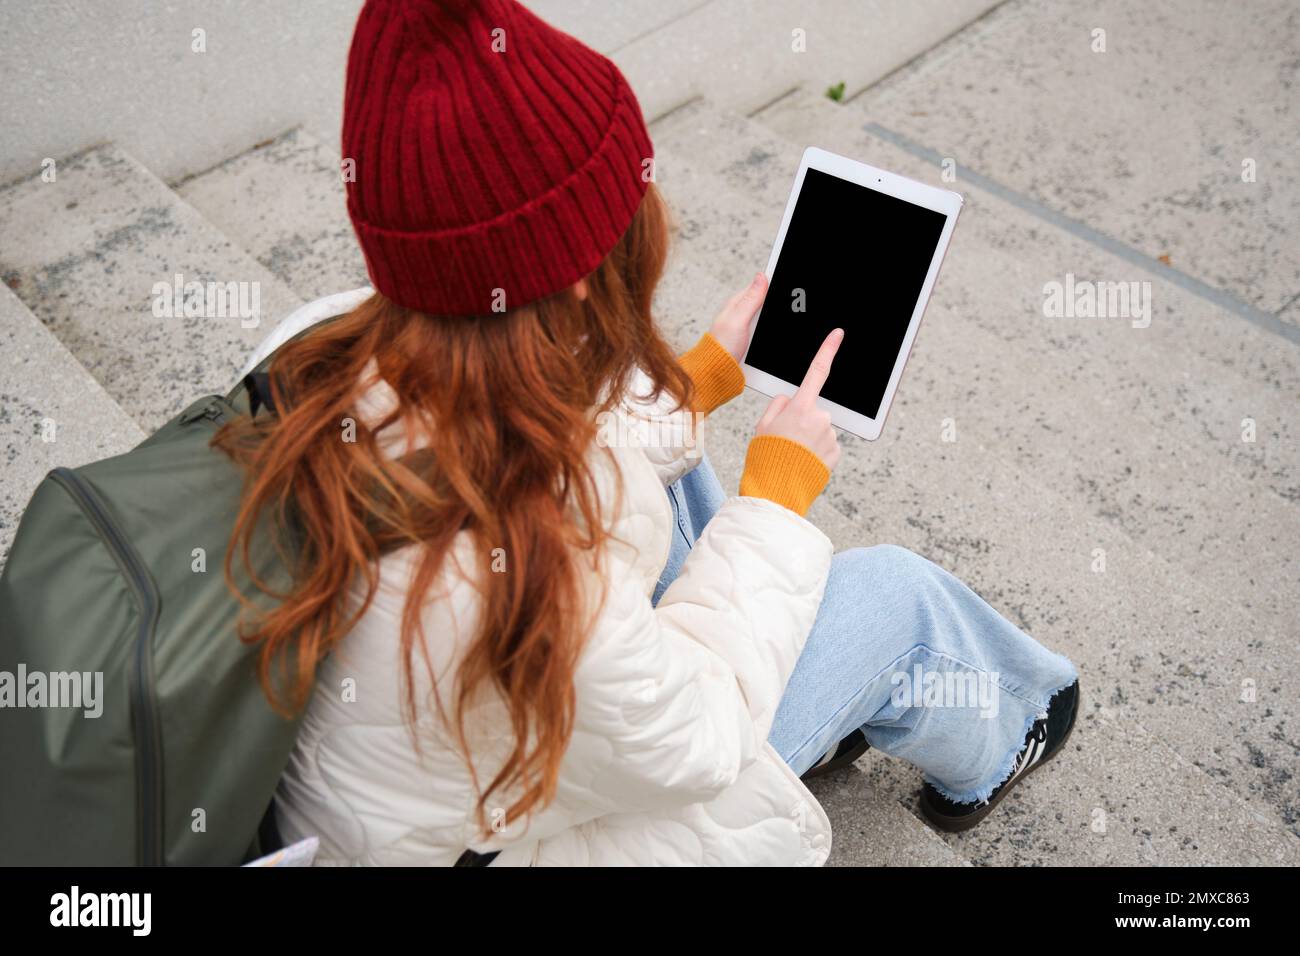 Rear view of redhead girl touches digital tablet screen, touchpad, texts message, uses internet application on gadget, sits on stairs outdoors. Stock Photo